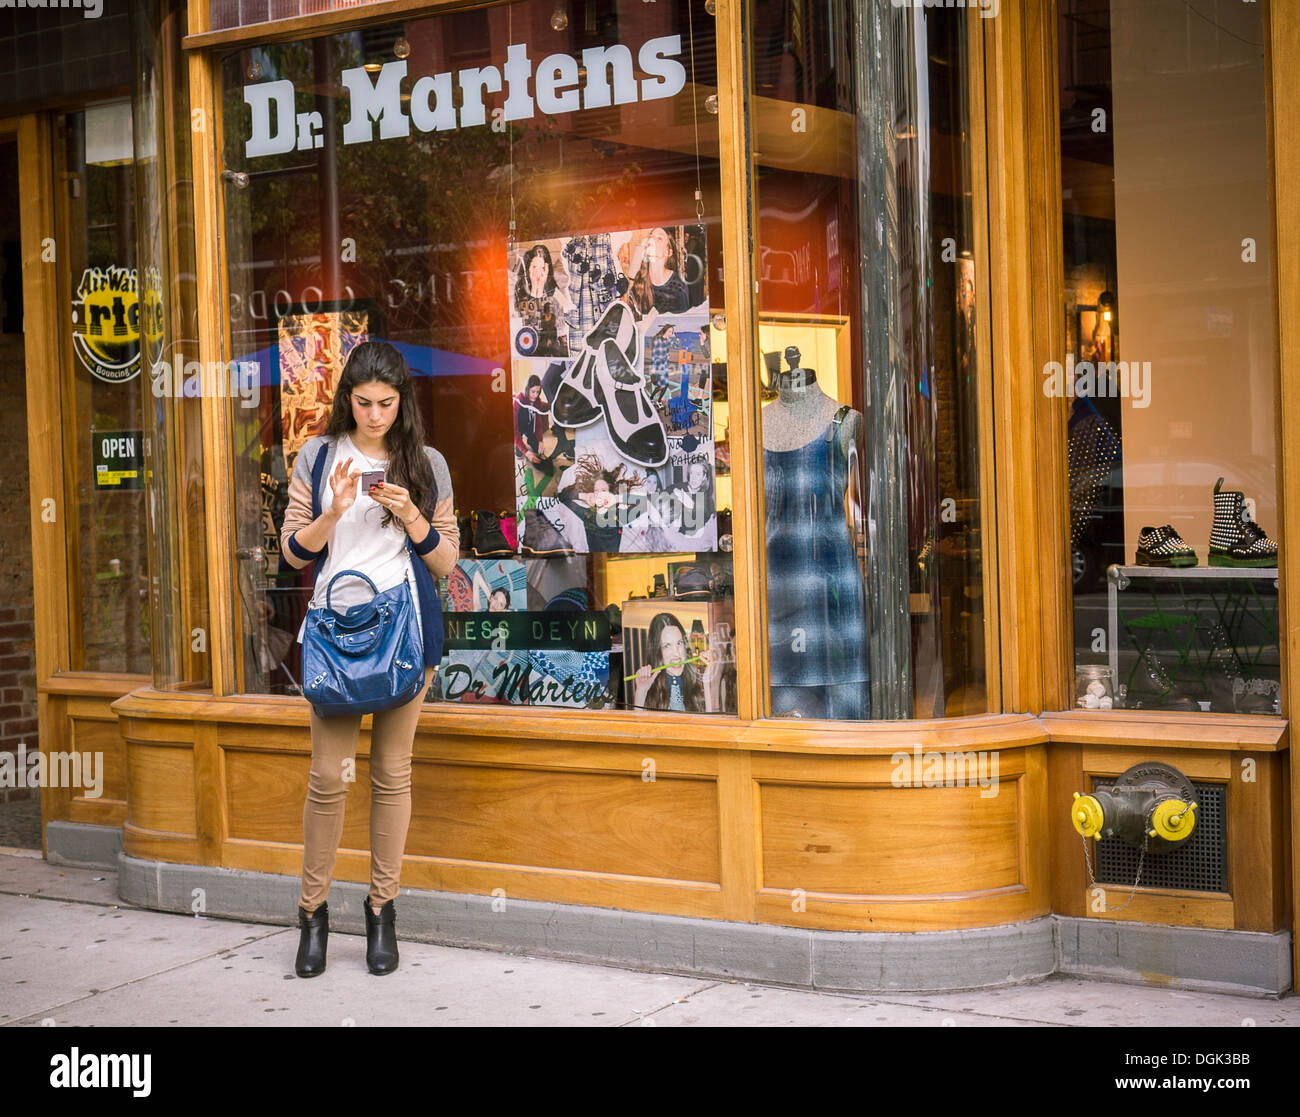 A Dr. Martens shoe store in New York Stock Photo - Alamy